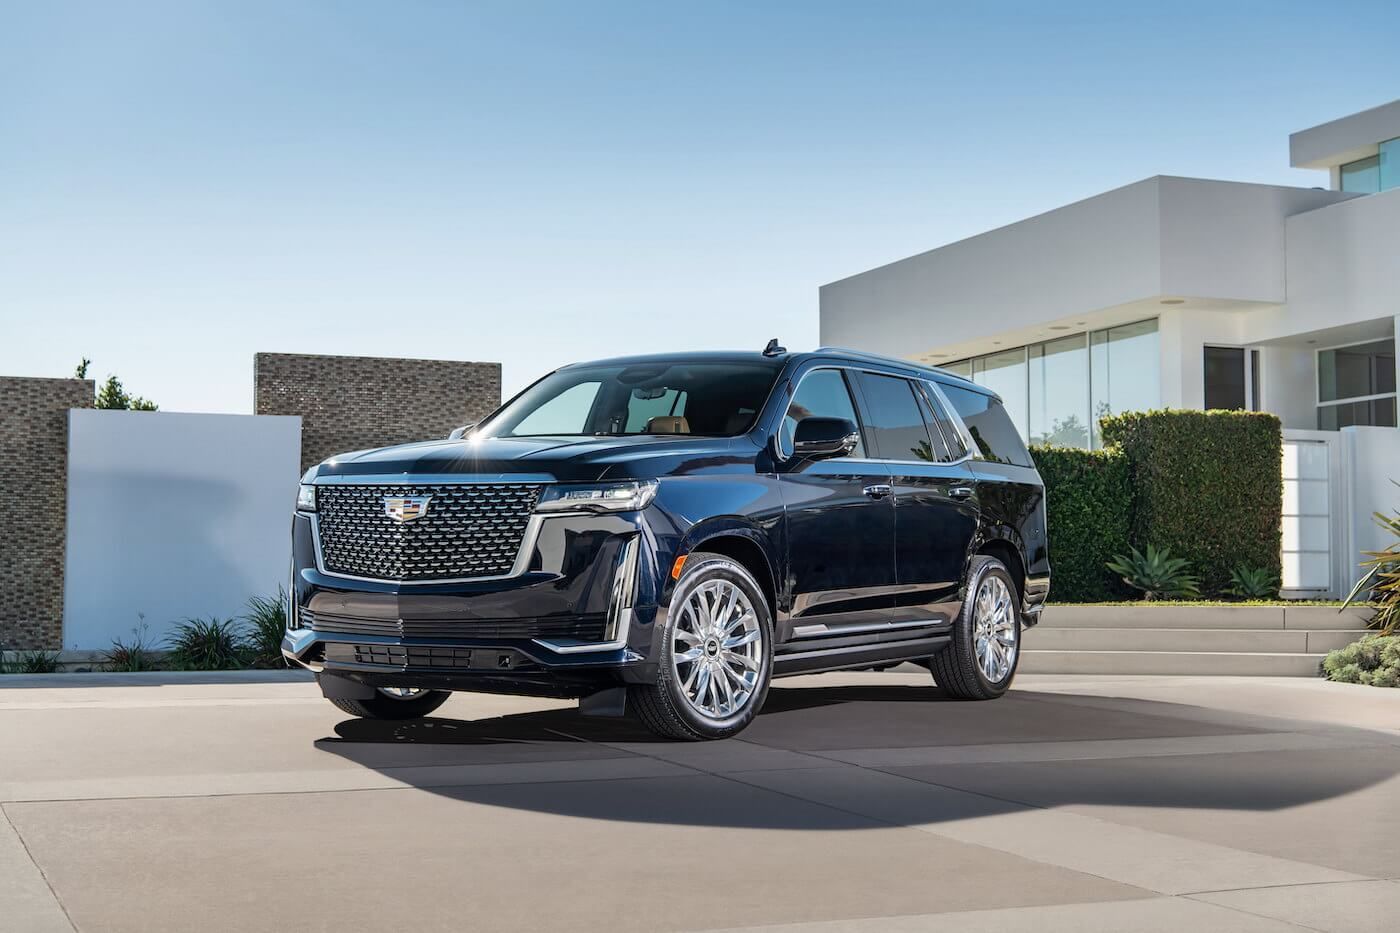 The 2021 Cadillac Escalade luxury SUV parked in the backyard of a house